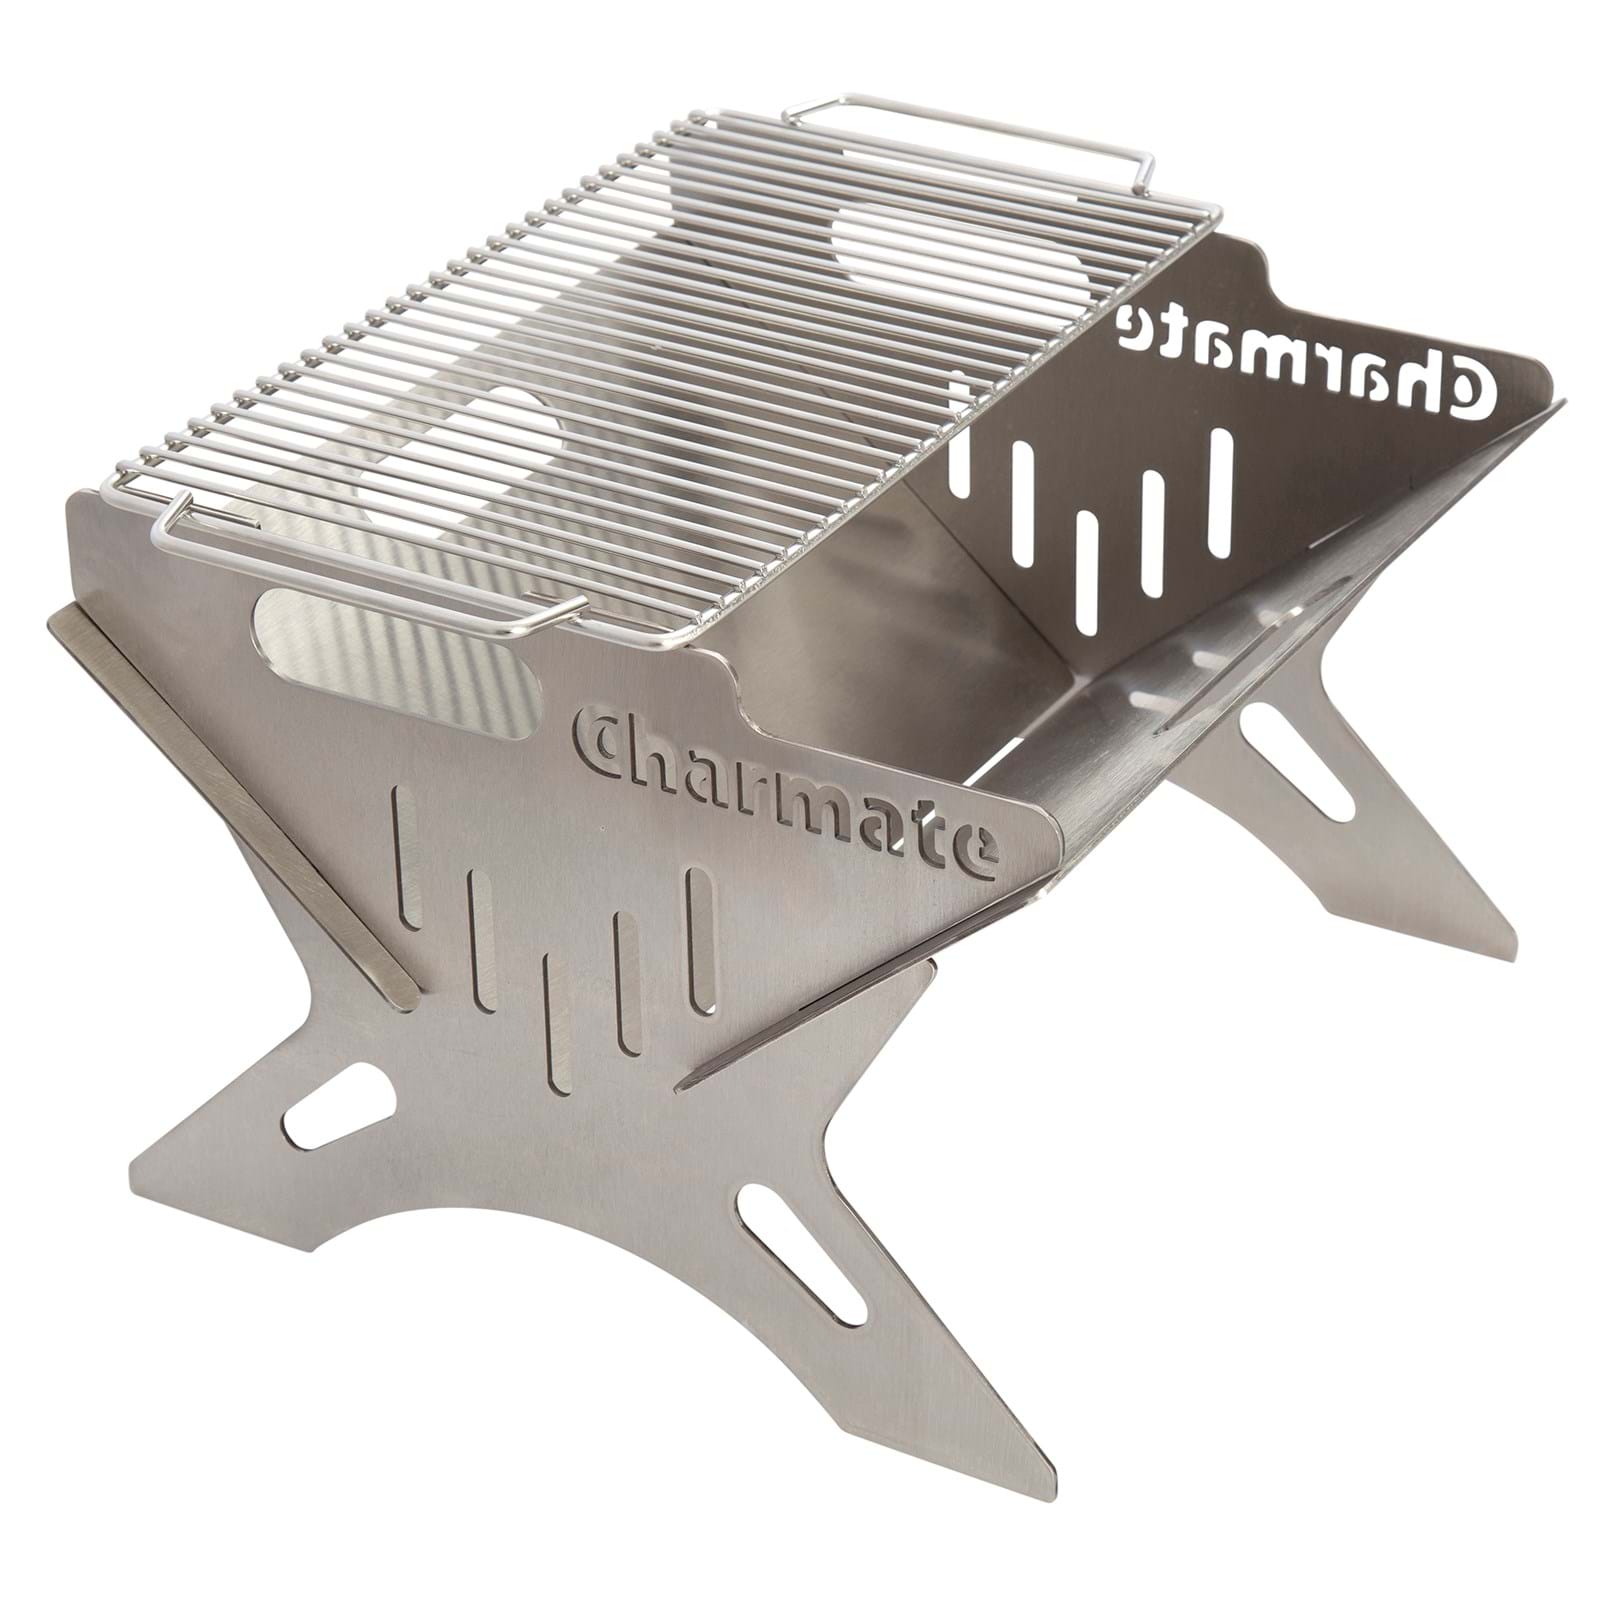 Charmate Collapsible BBQ & Firepit (390mm X 330mm)